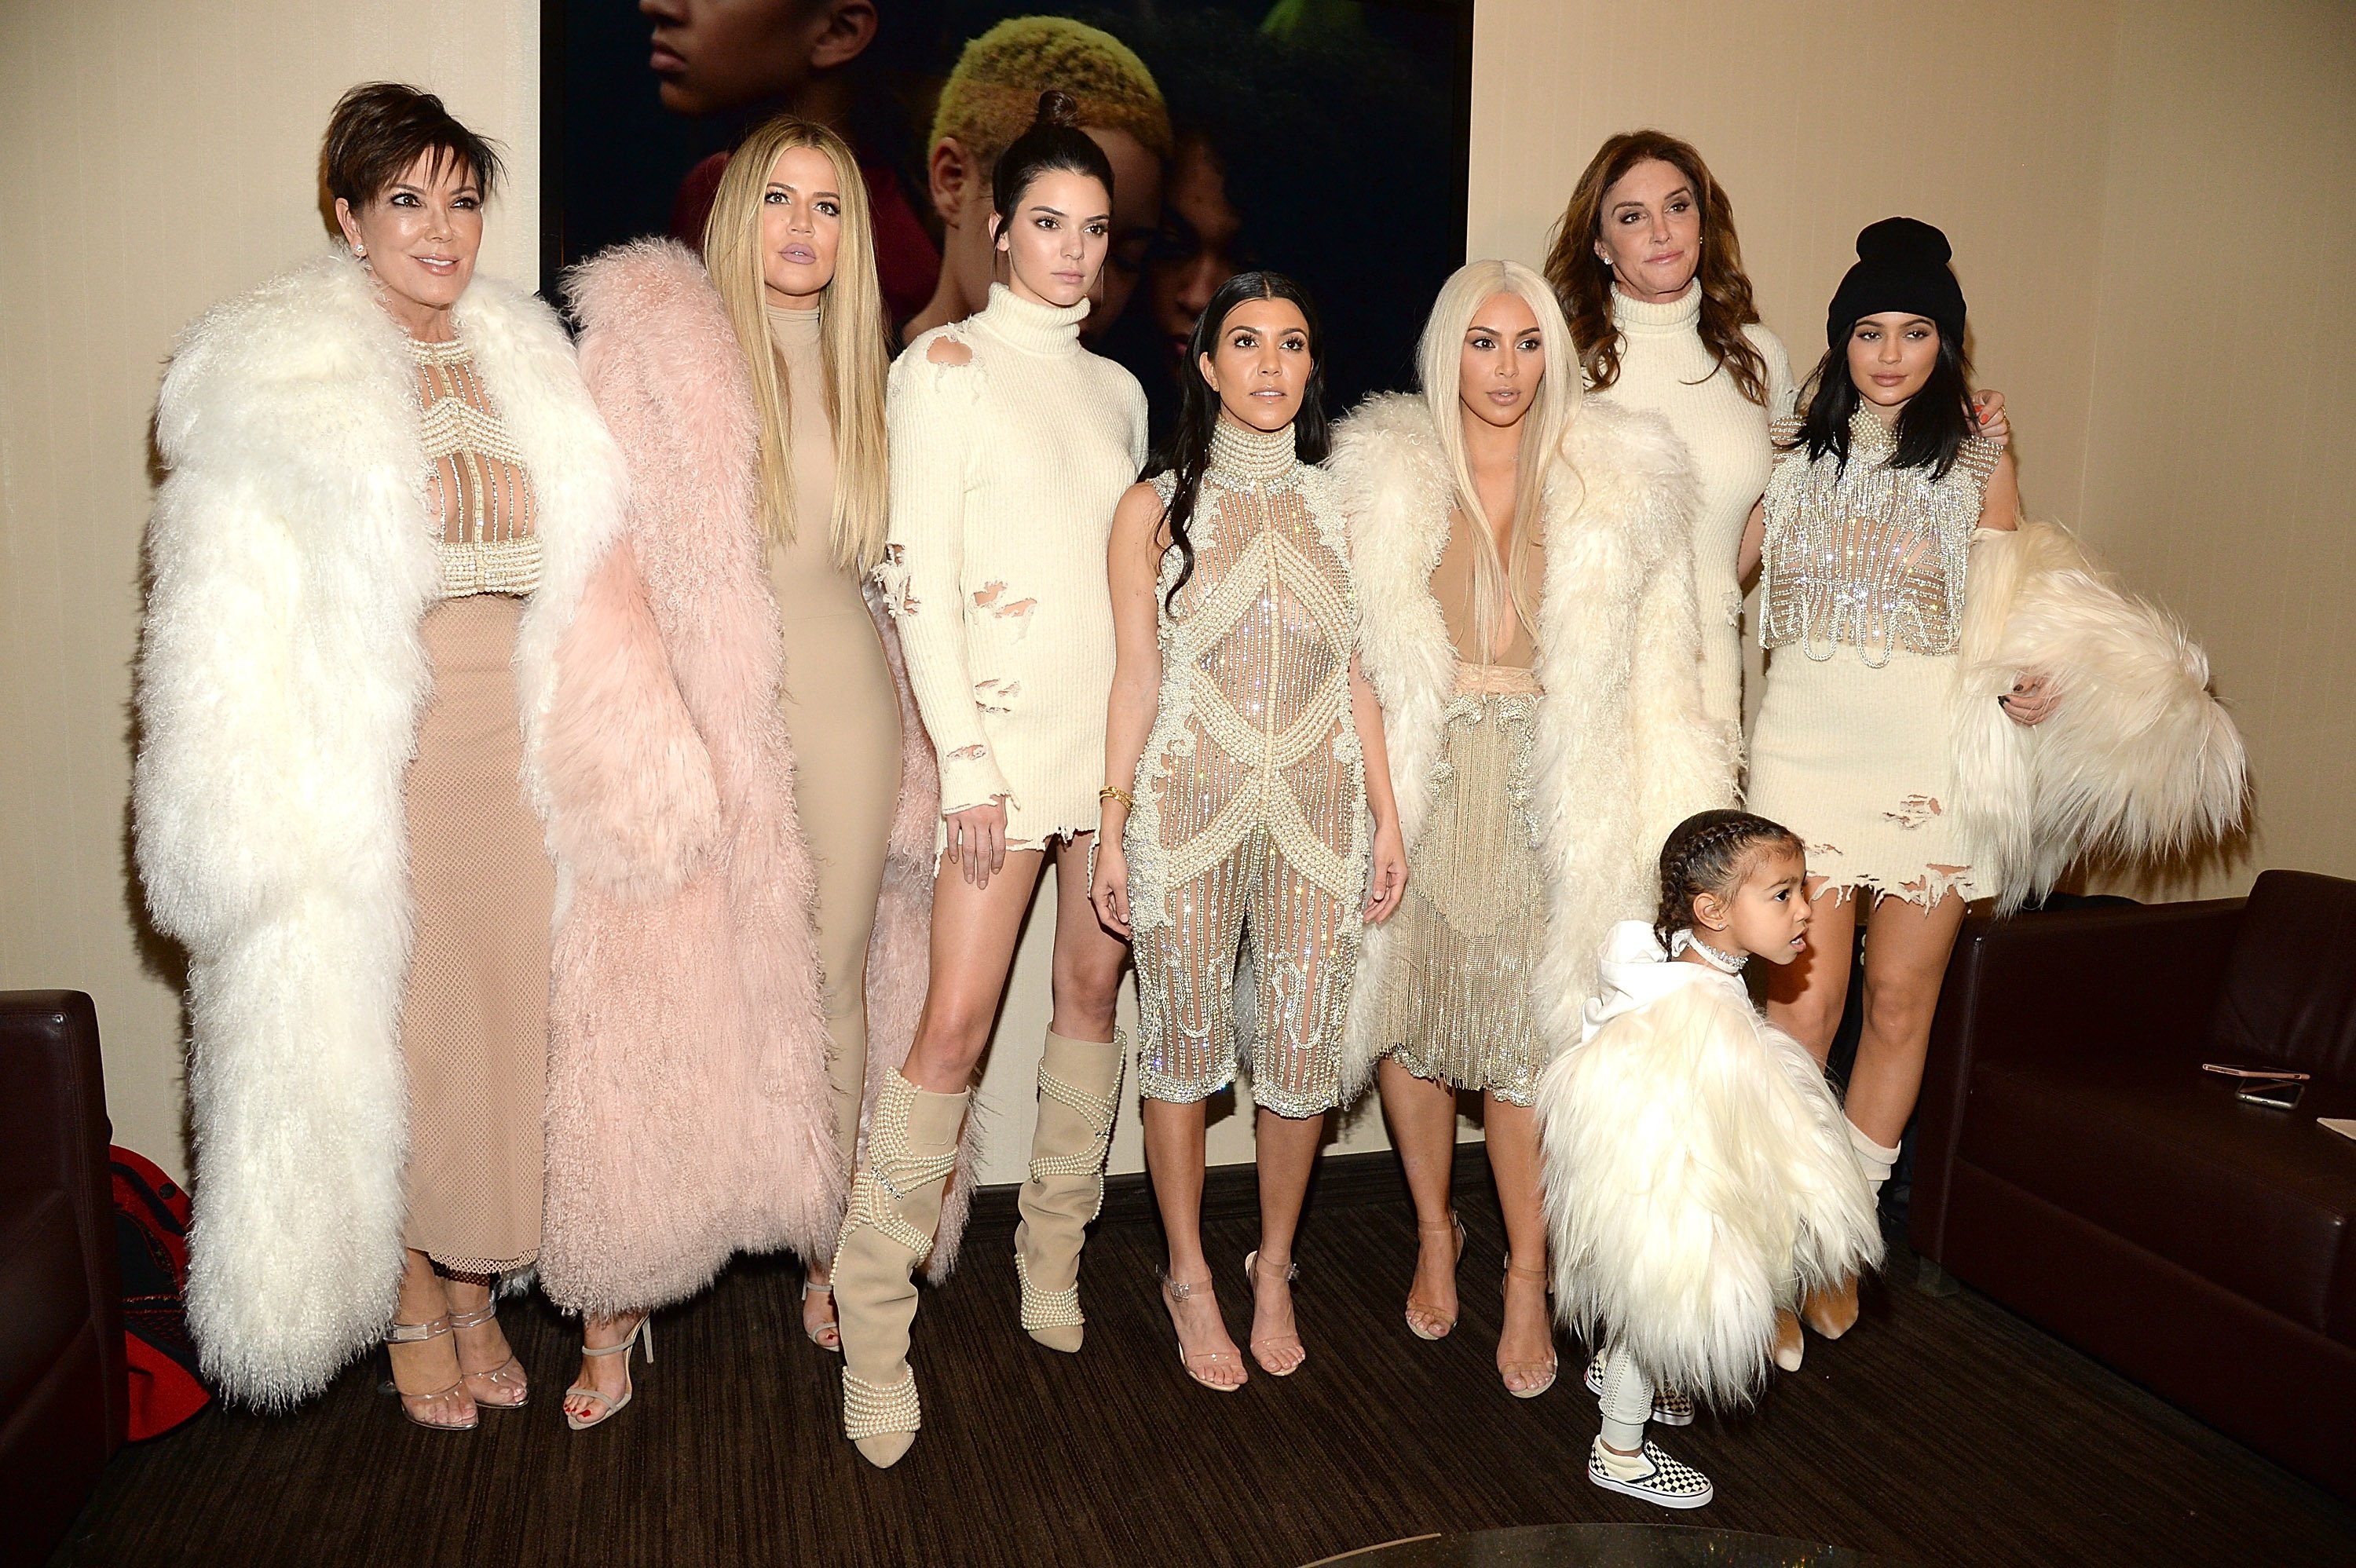 Khloe Kardashian, Kris Jenner, Kendall Jenner, Kourtney Kardashian, Kim Kardashian West, North West, Caitlyn Jenner, and Kylie Jenner at the Kanye West Yeezy Season 3 show at Madison Square Garden on February 11, 2016 in New York City.|Source: Getty Images